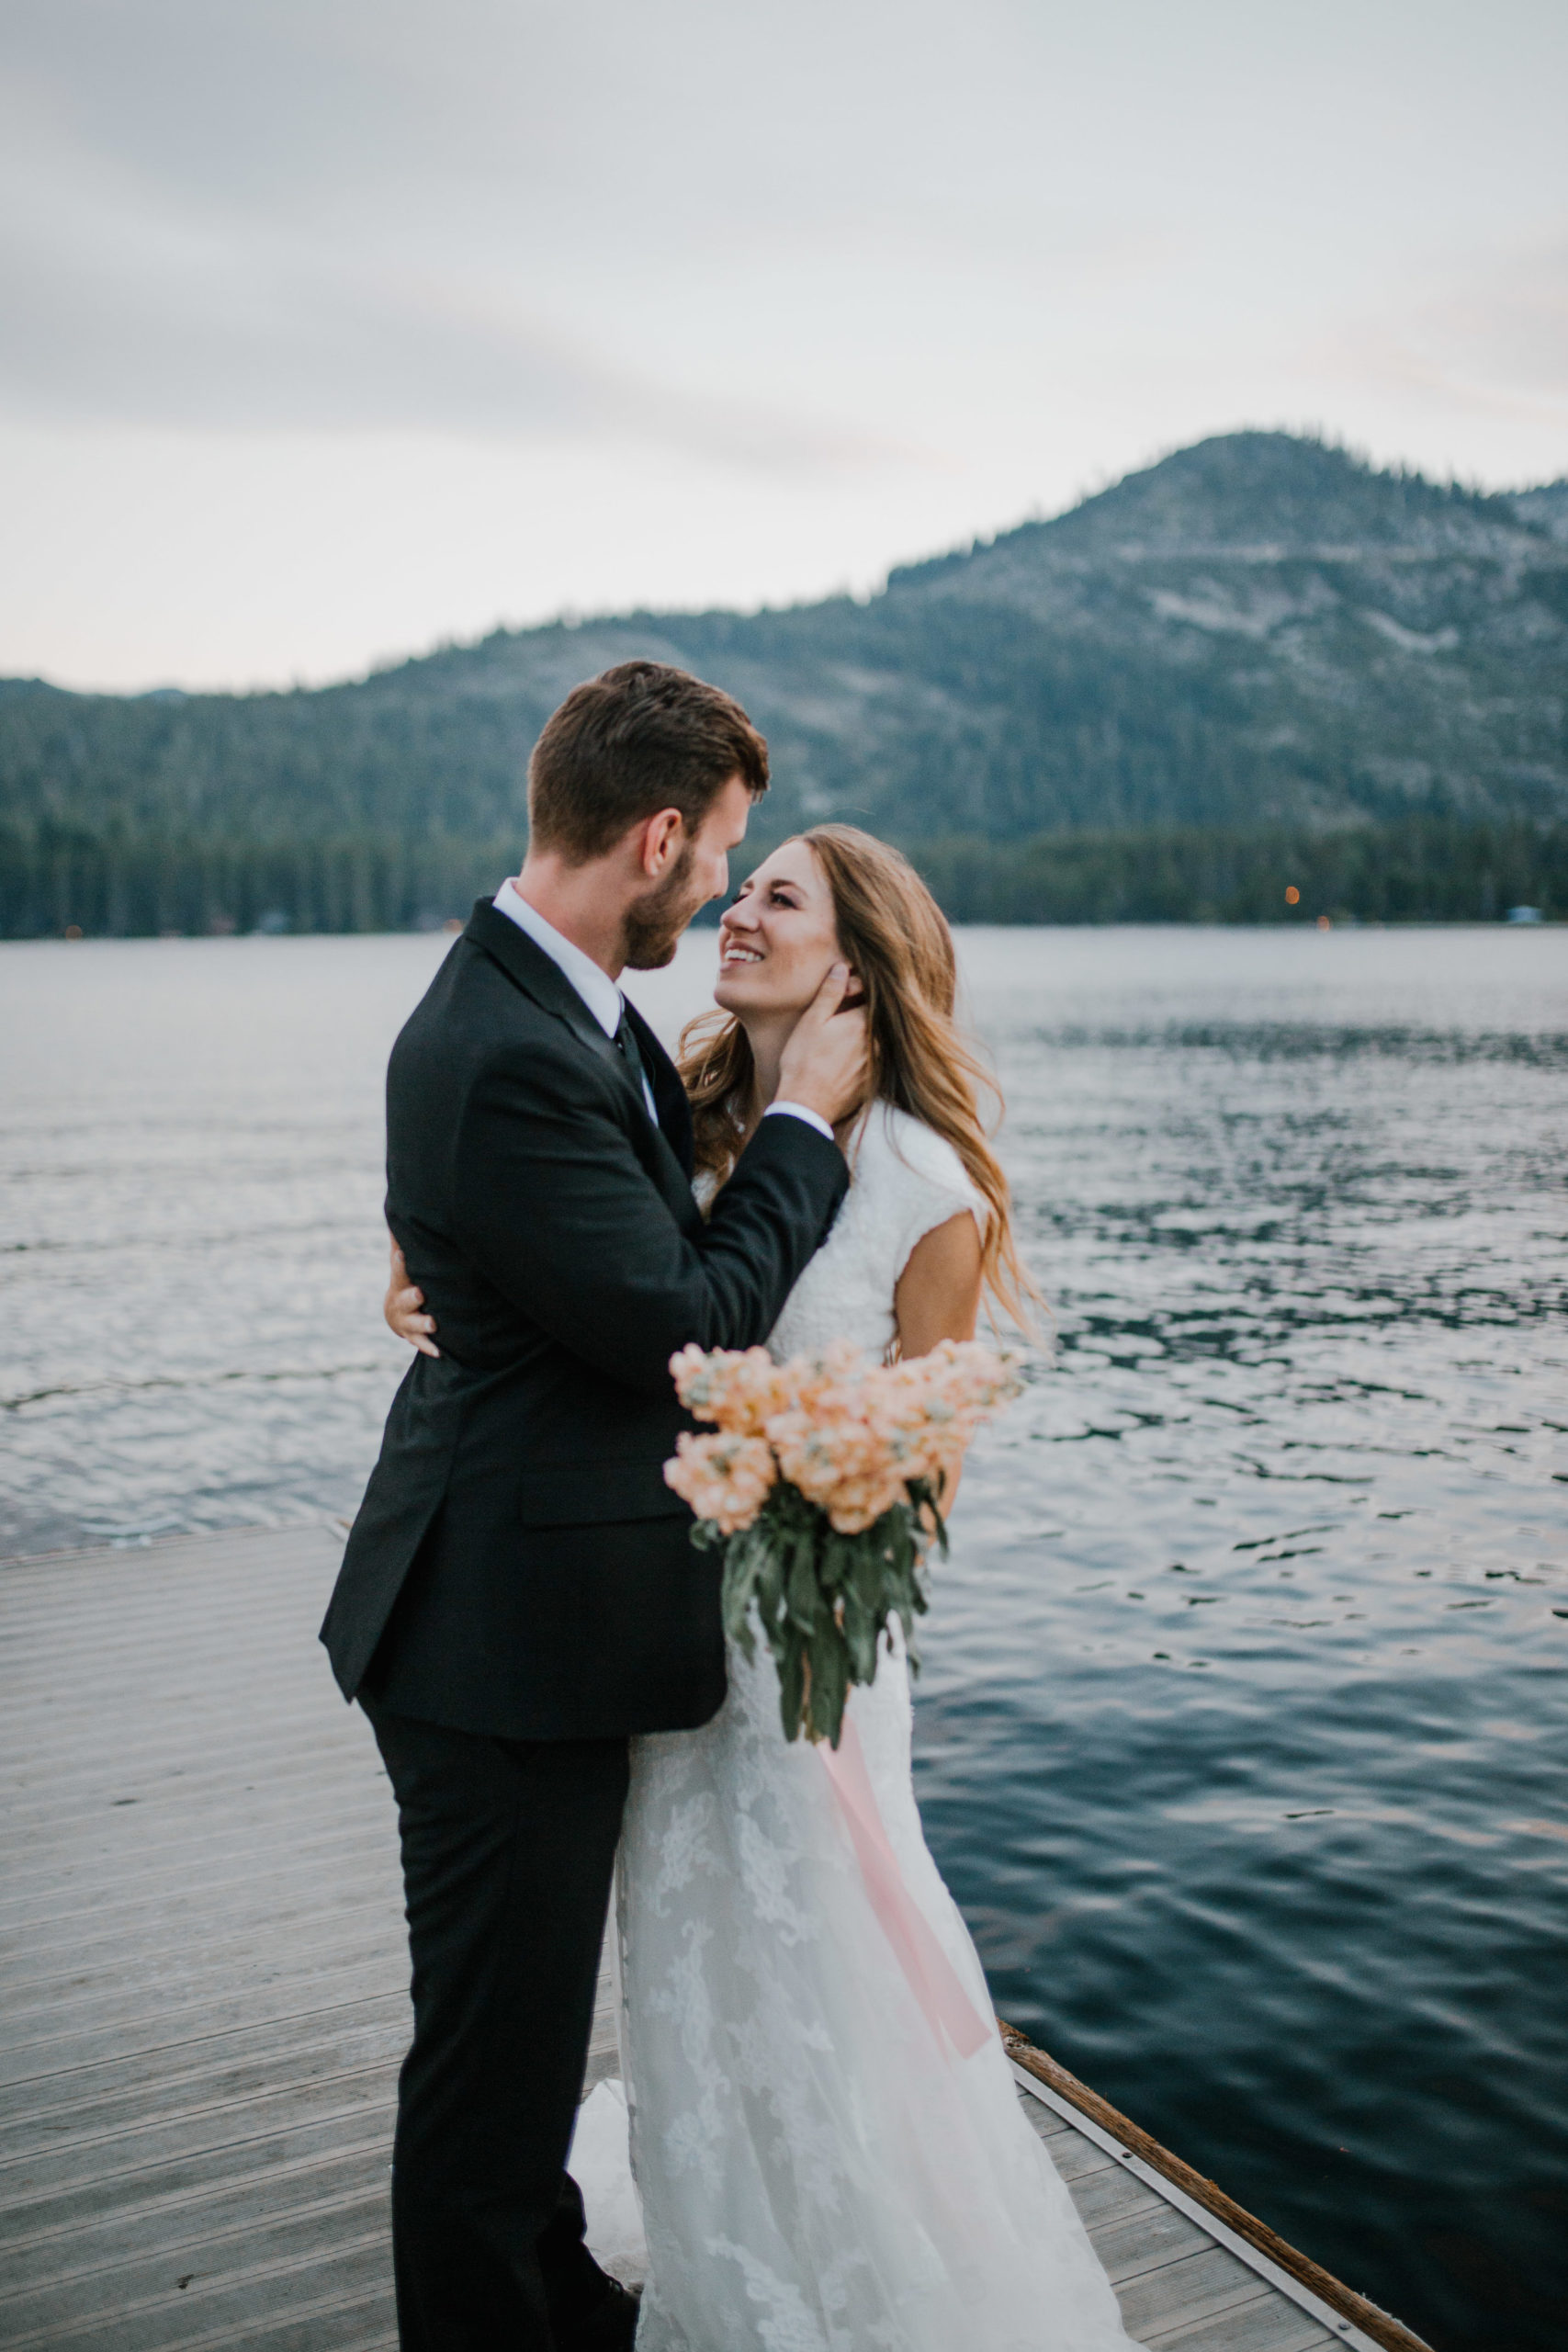 Sacramento wedding photographer captures bride and groom on a dock in the middle of a lake in Tennessee at sunset as the groom embraces the bride